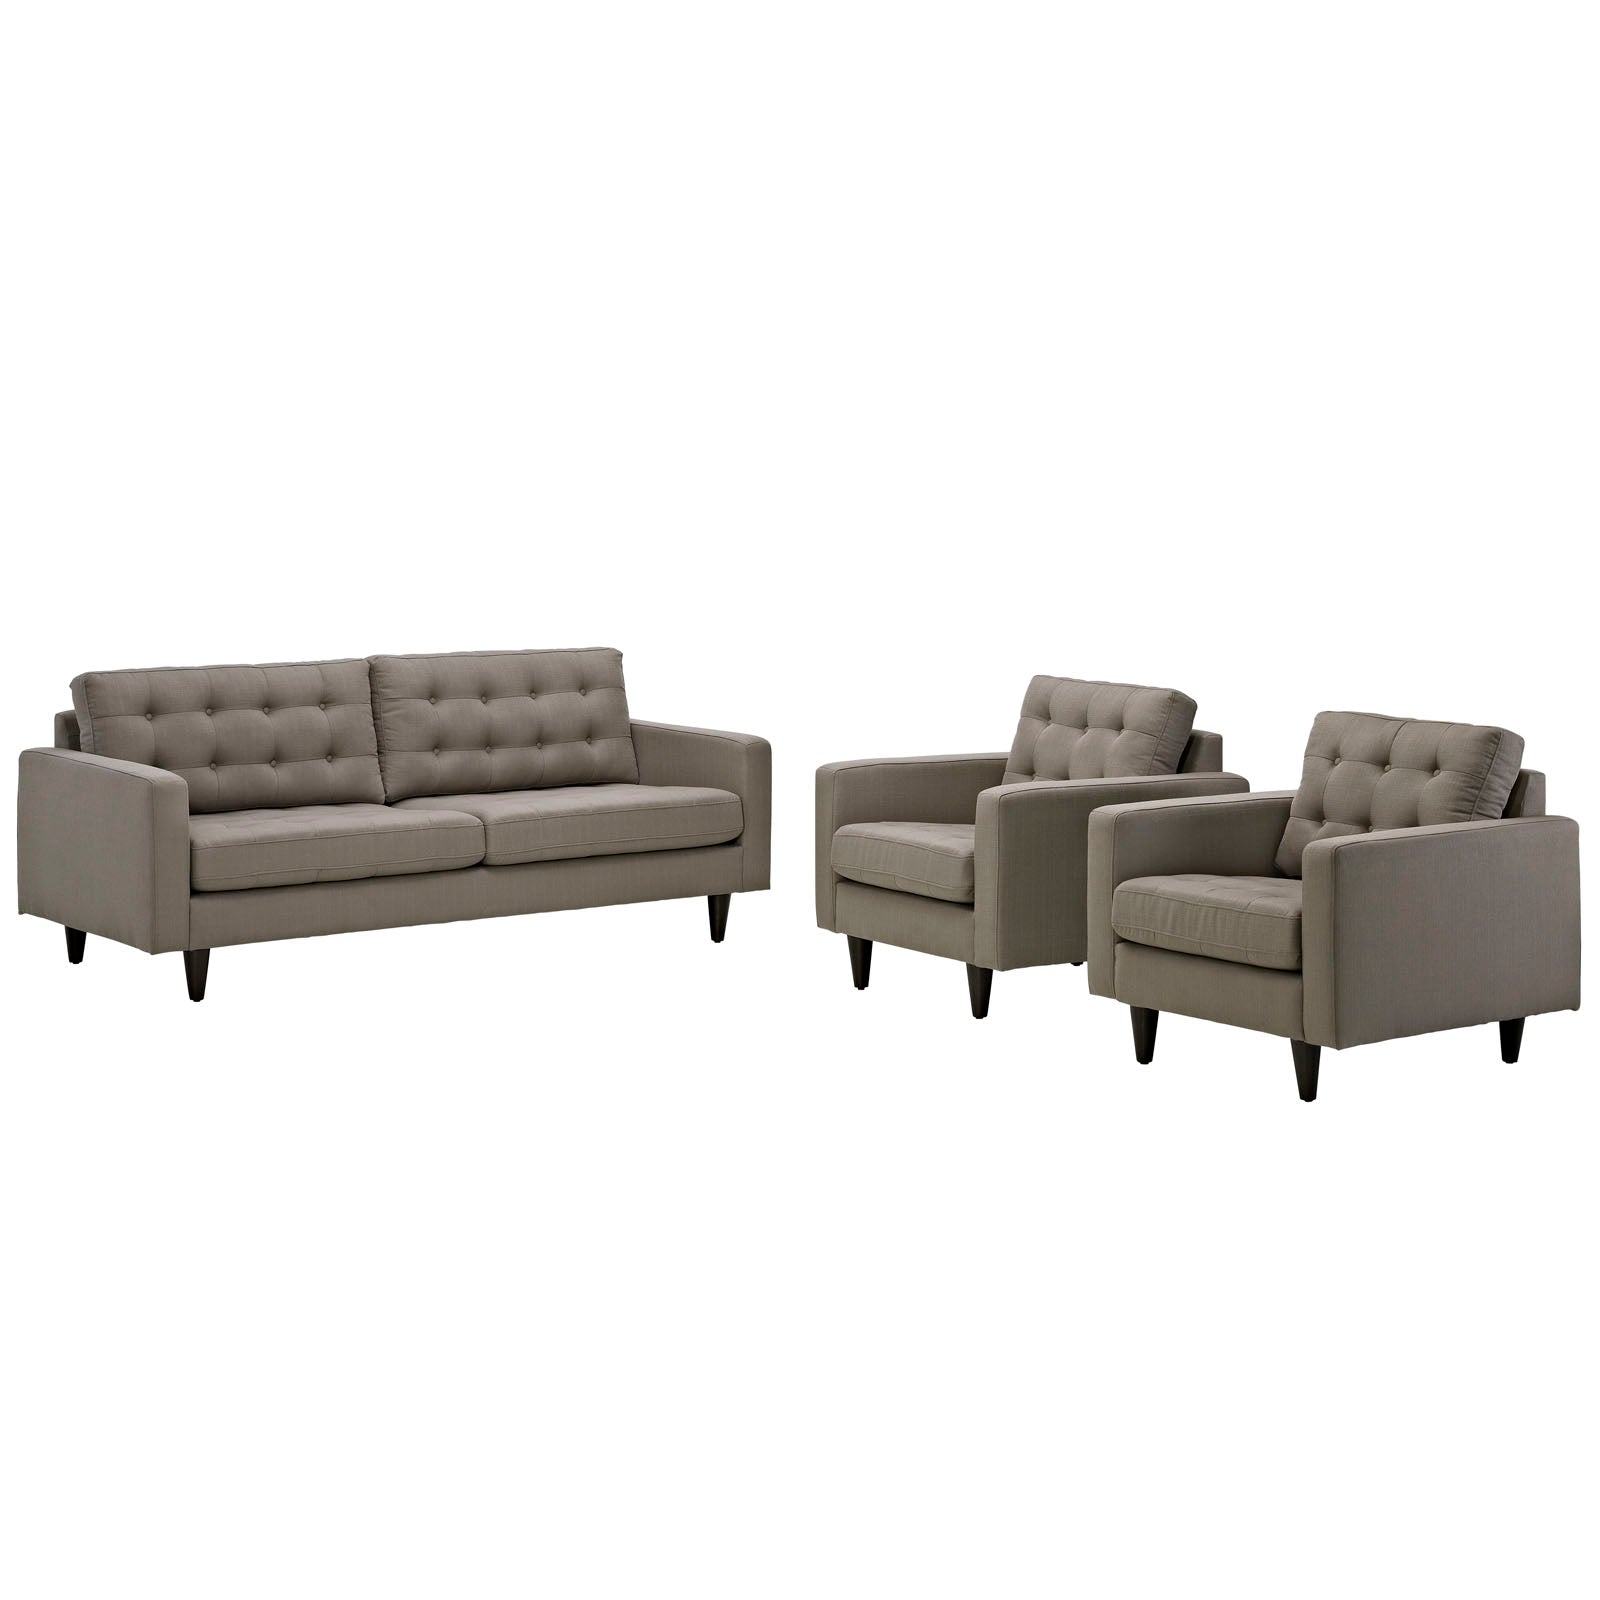 Empress Sofa and Armchairs Set of 3 - East Shore Modern Home Furnishings